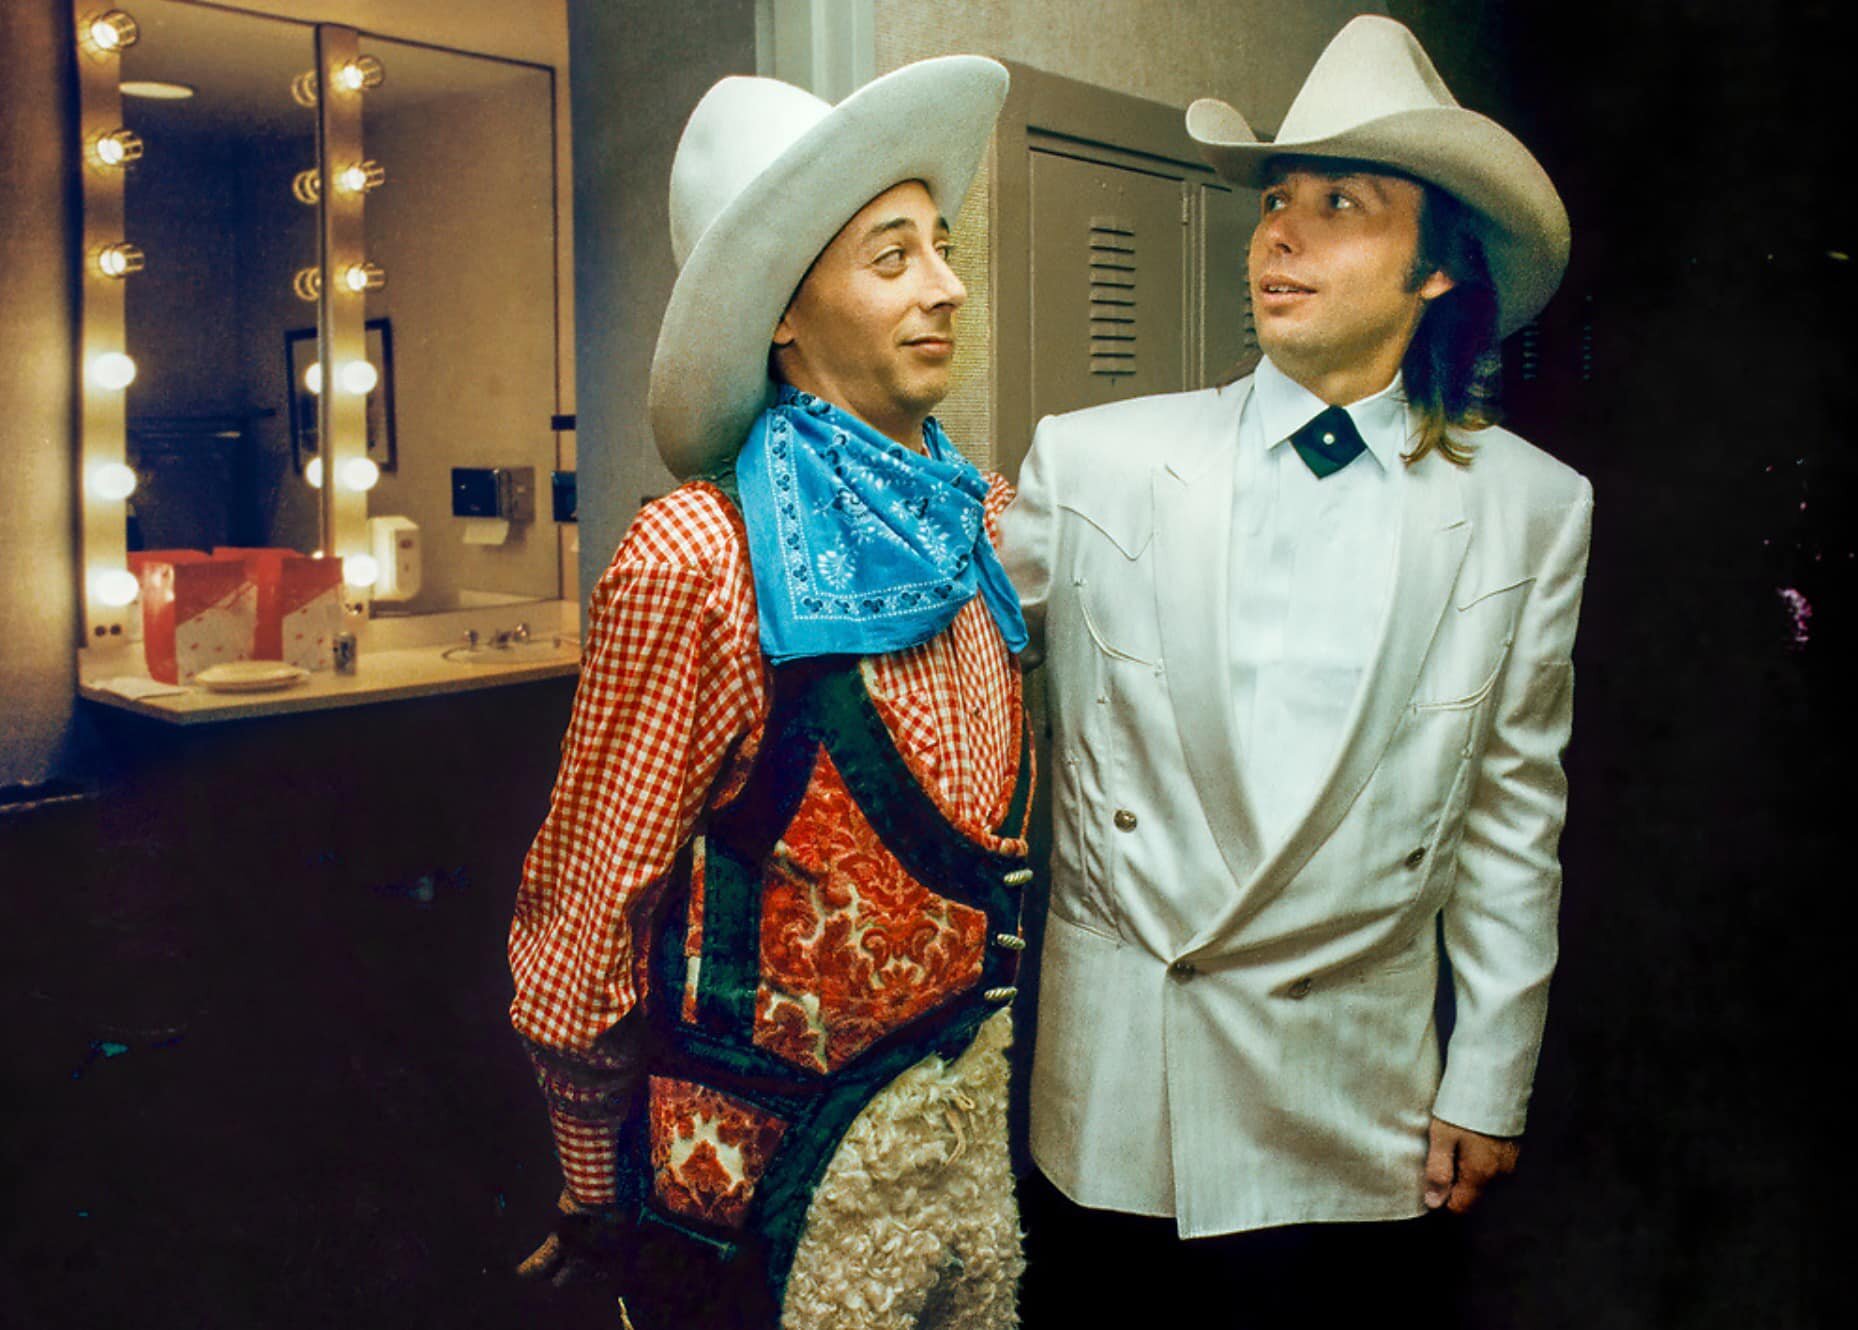 Had to go deep into my files to find this funny moment backstage at the Grand Ole Opry between Pee Wee Herman (Paul Reubens) and Dwight Yoakam. Sad to hear of Reubens passing.
#peeweeherman #dwightyoakam